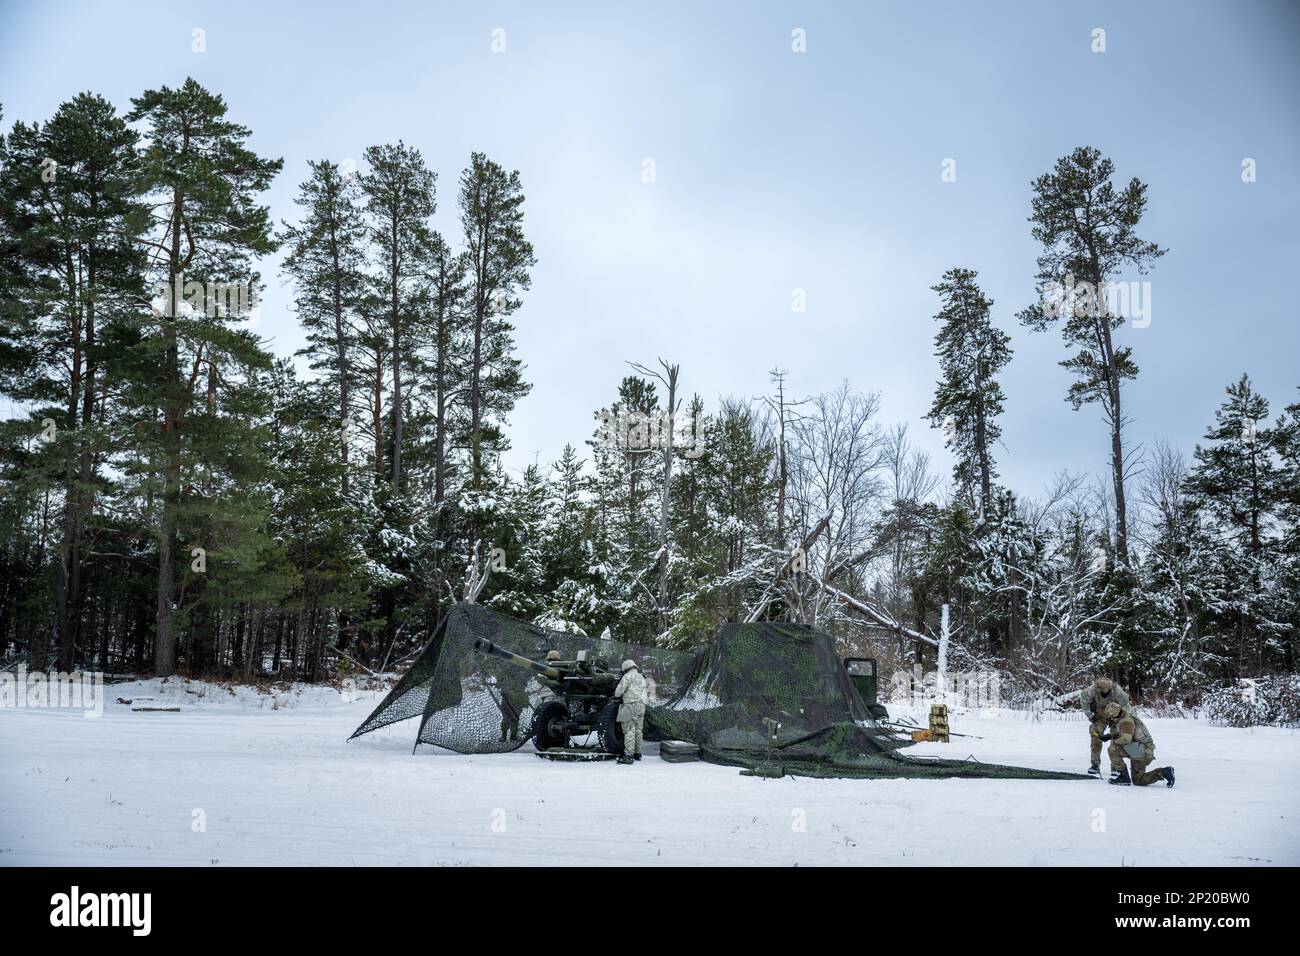 A gun team from the 1-120th Field Artillery Regiment, Wisconsin Army National Guard, constructs a camouflage canopy while setting up an M119 howitzer during Northern Strike 23-1, Jan. 25, 2023, at Camp Grayling, Mich. Units that participate in Northern Strike’s winter iteration build readiness by conducting joint, cold-weather training designed to meet objectives of the Department of Defense’s Arctic Strategy. Stock Photo